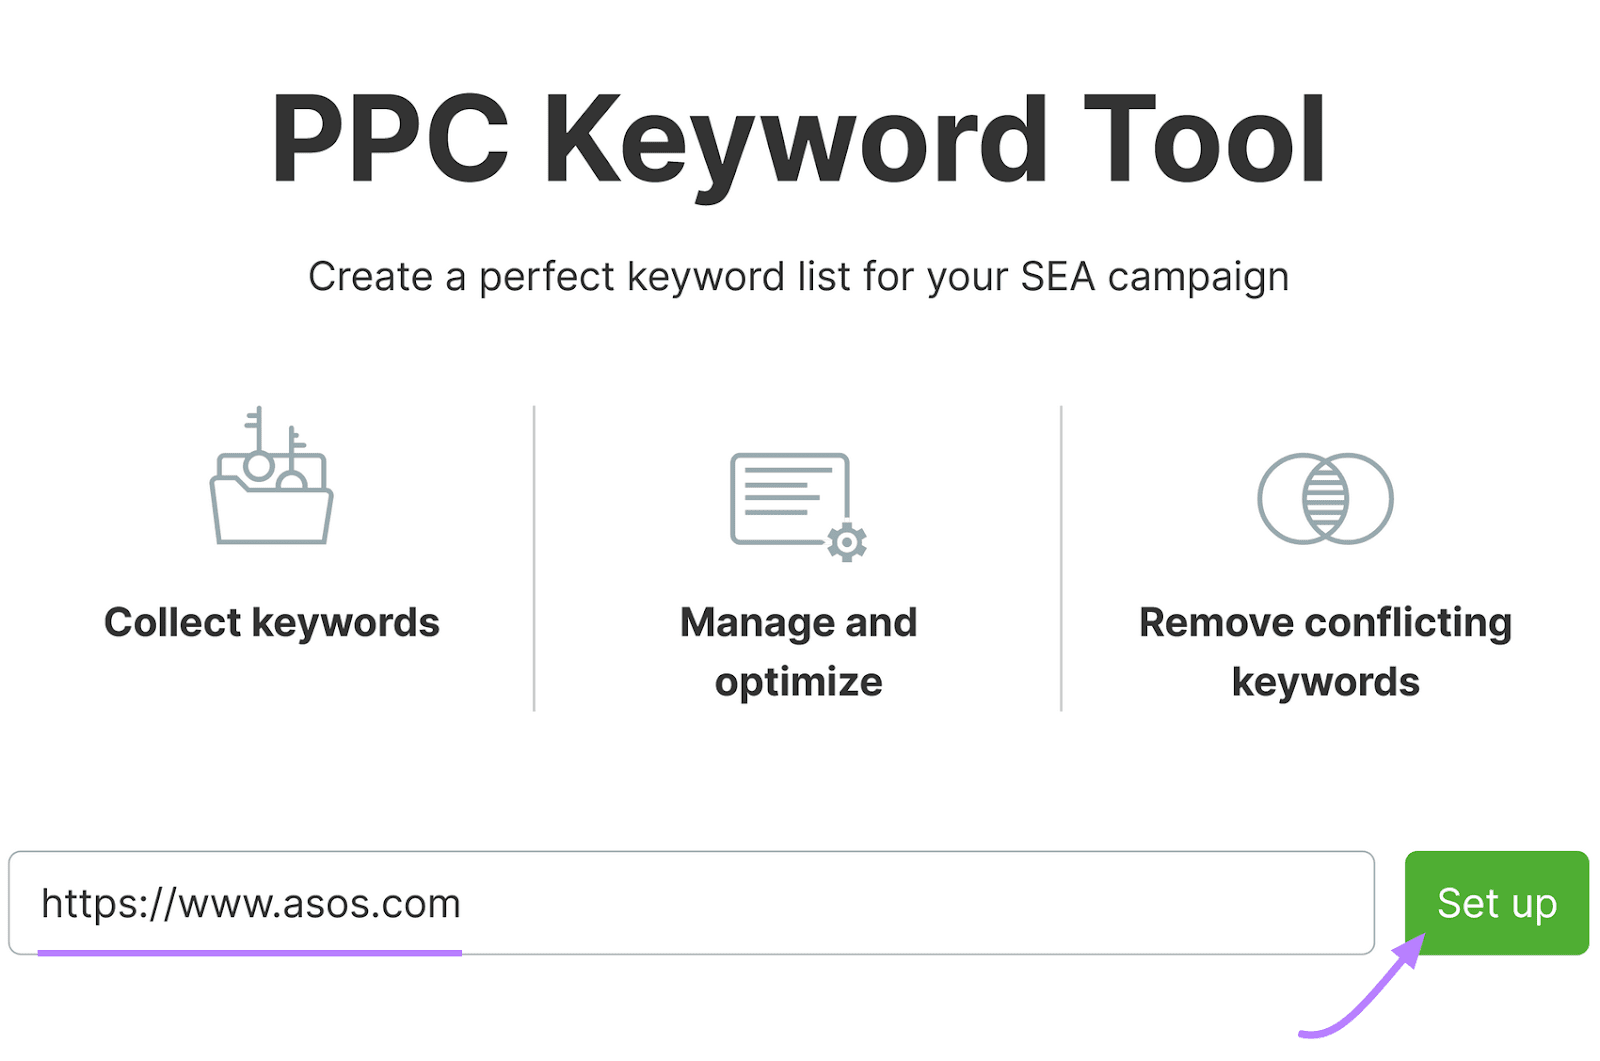 PPC Keyword Tool interface showing a search bar with the text "https://www.asos.com" inside it and a "Set up" button.